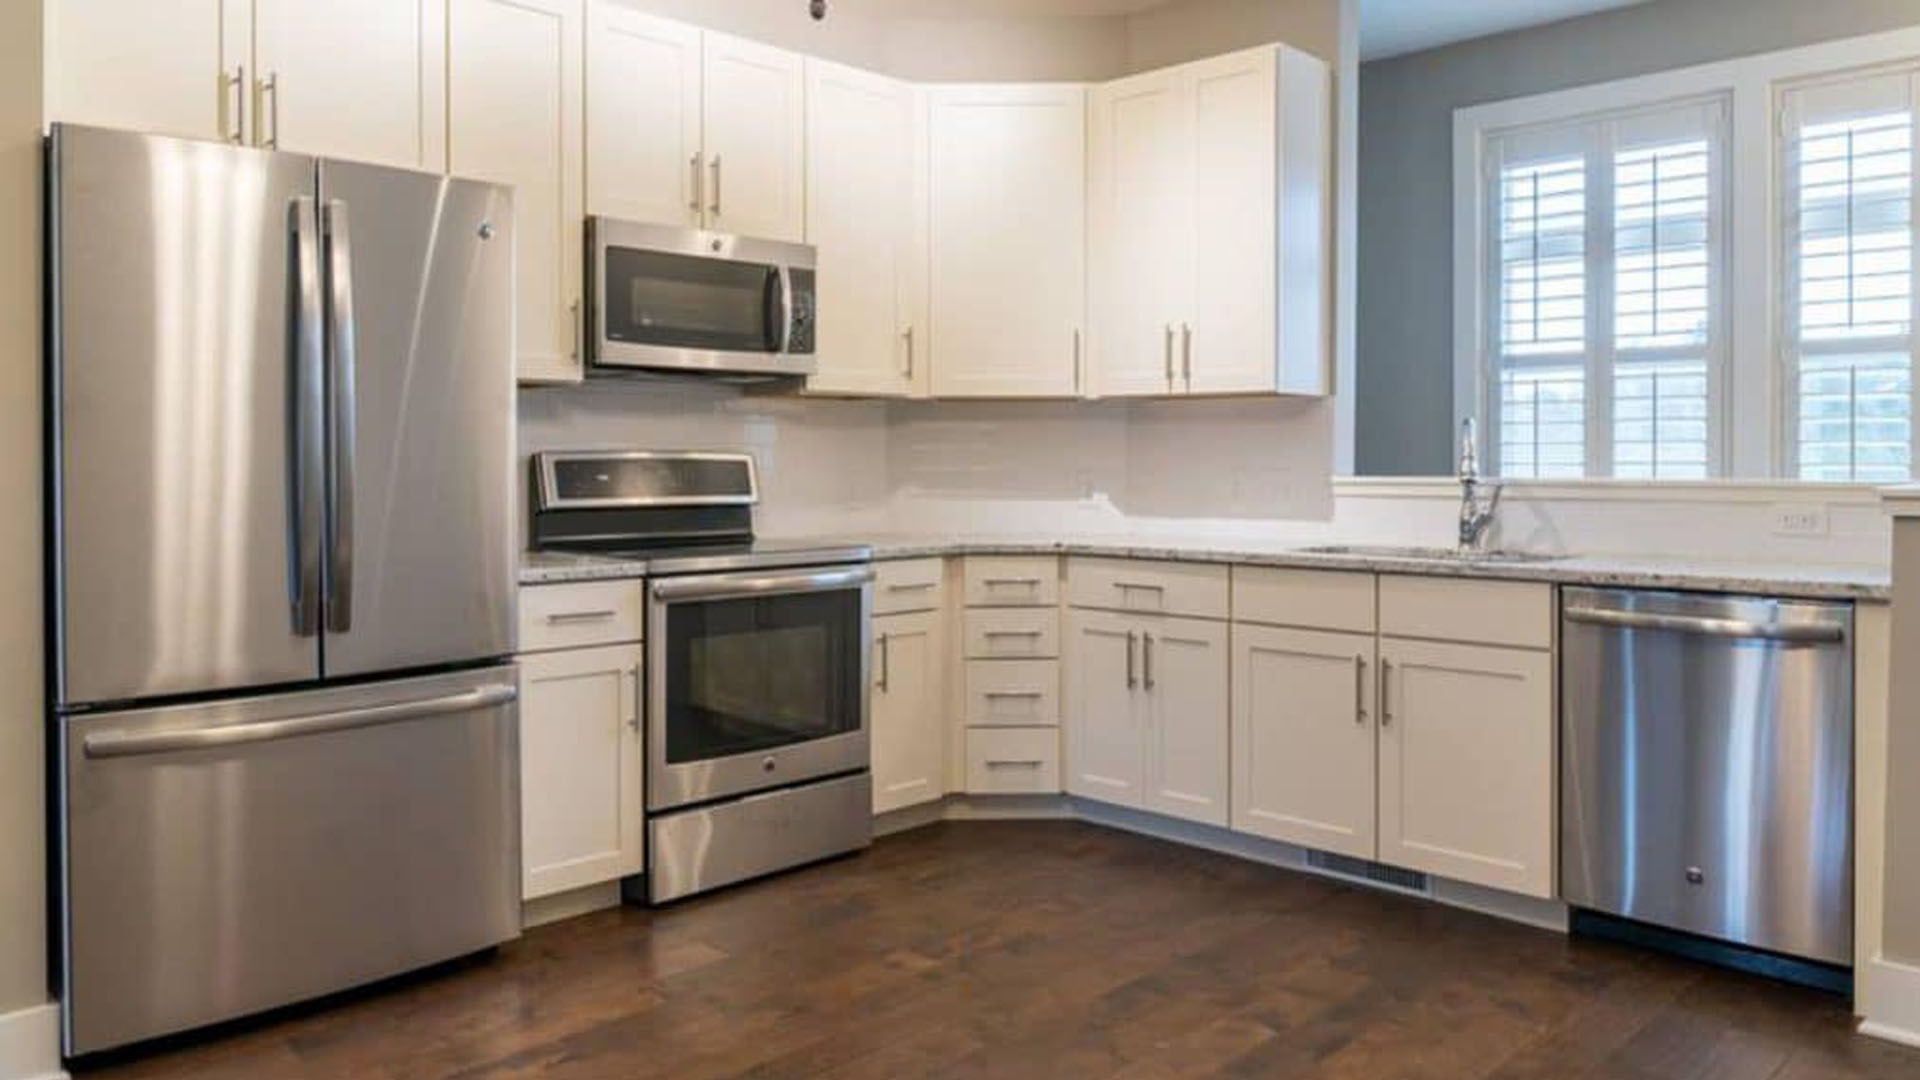 A kitchen with high-end appliances in a North Shore townhome.